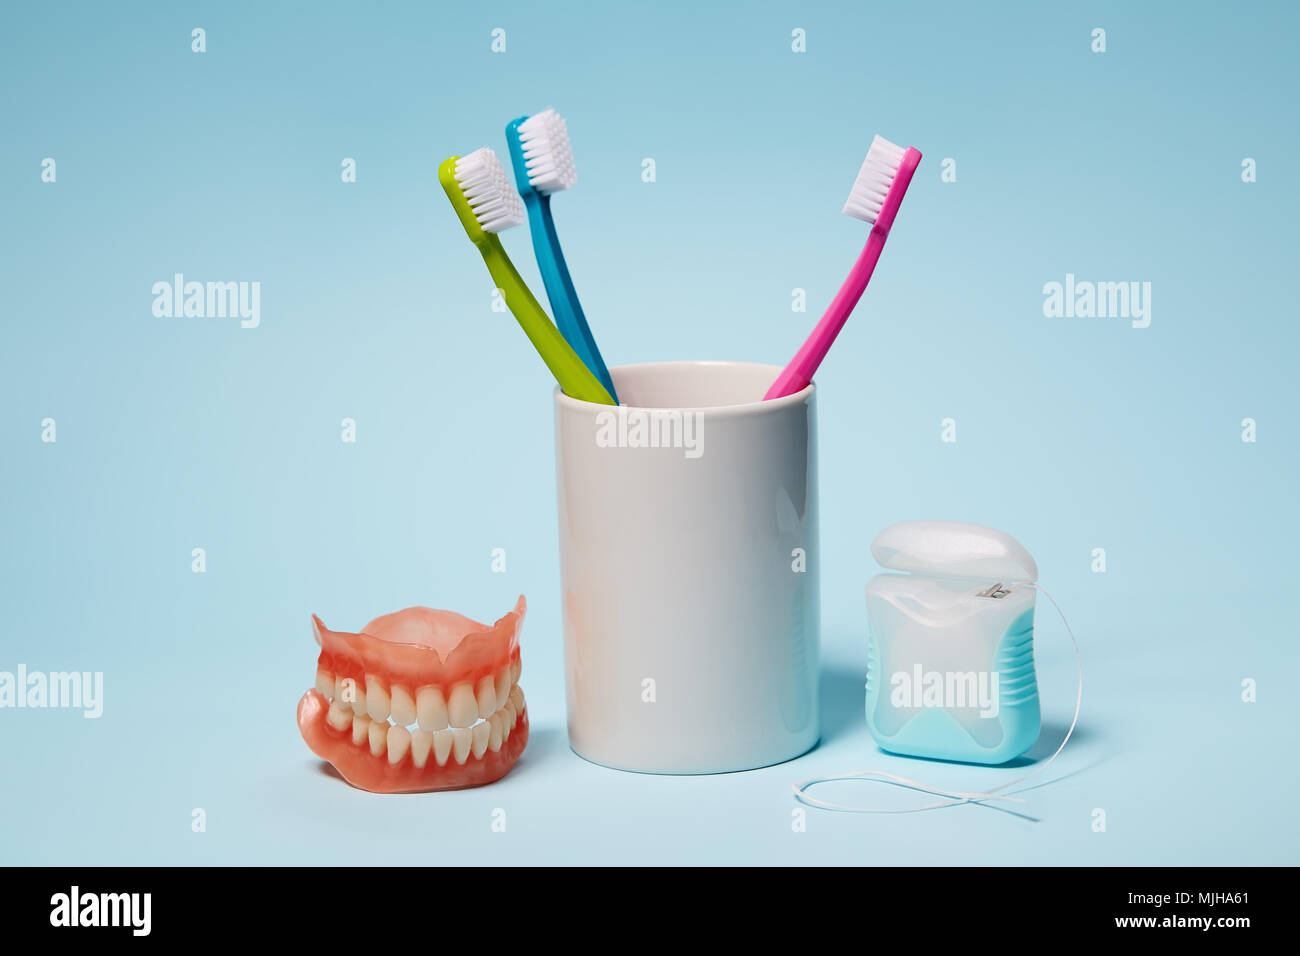 Dental Equipment. Colorful toothbrushes, dentures and dental floss on light blue background. Stock Photo